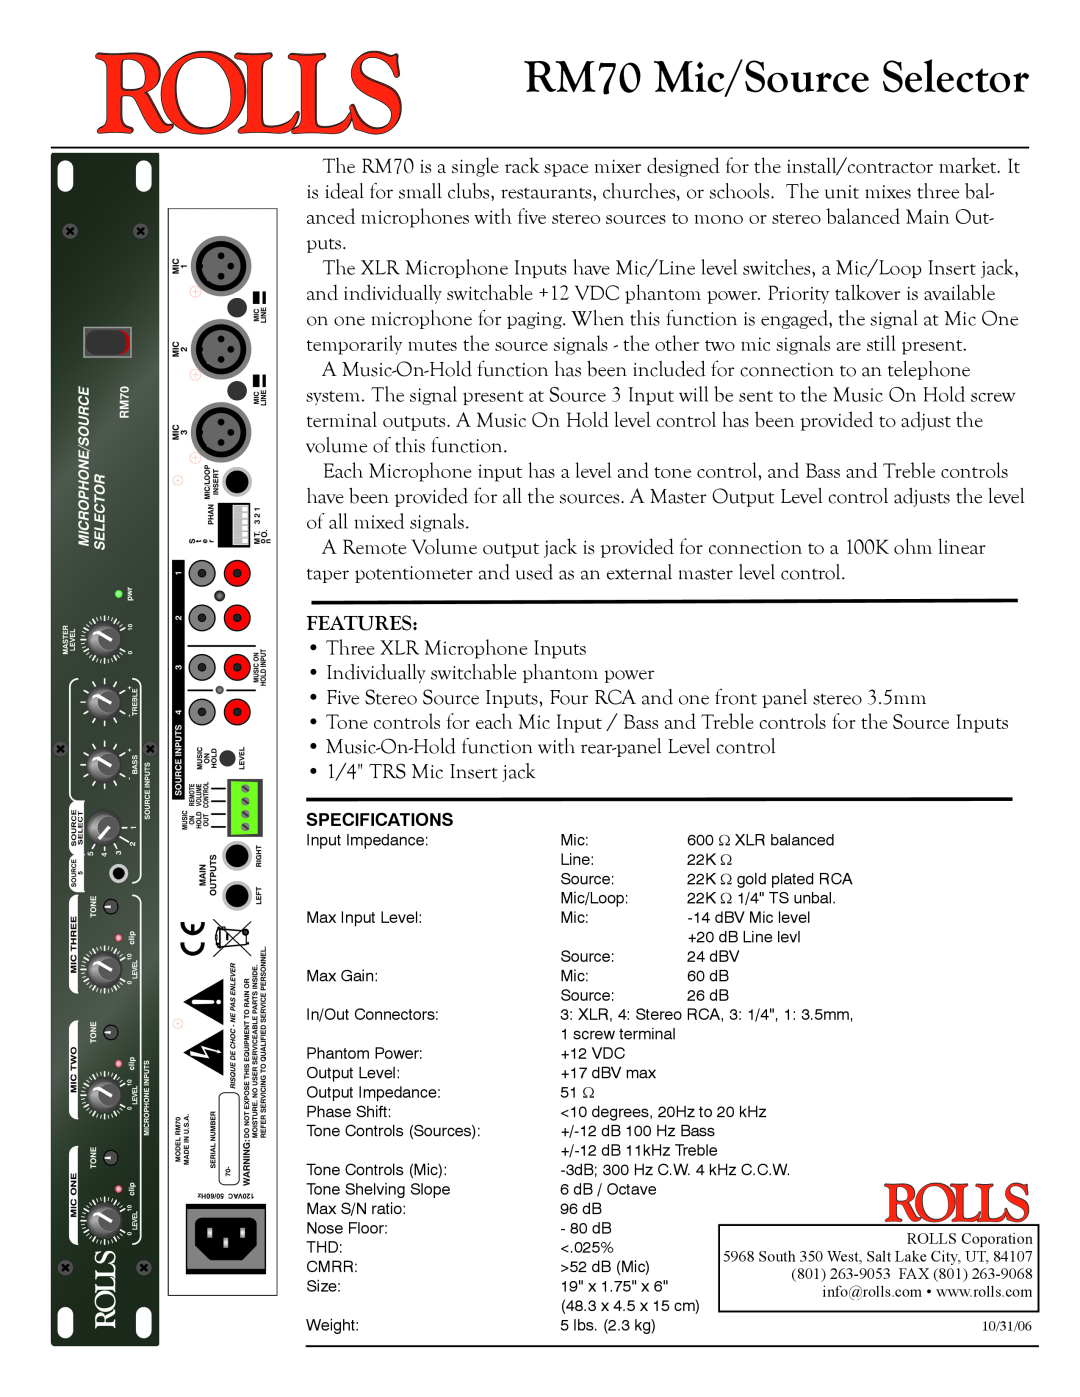 Rolls RM70 specifications Schematic, Specifications, Mic/Source Selector, User Guide 